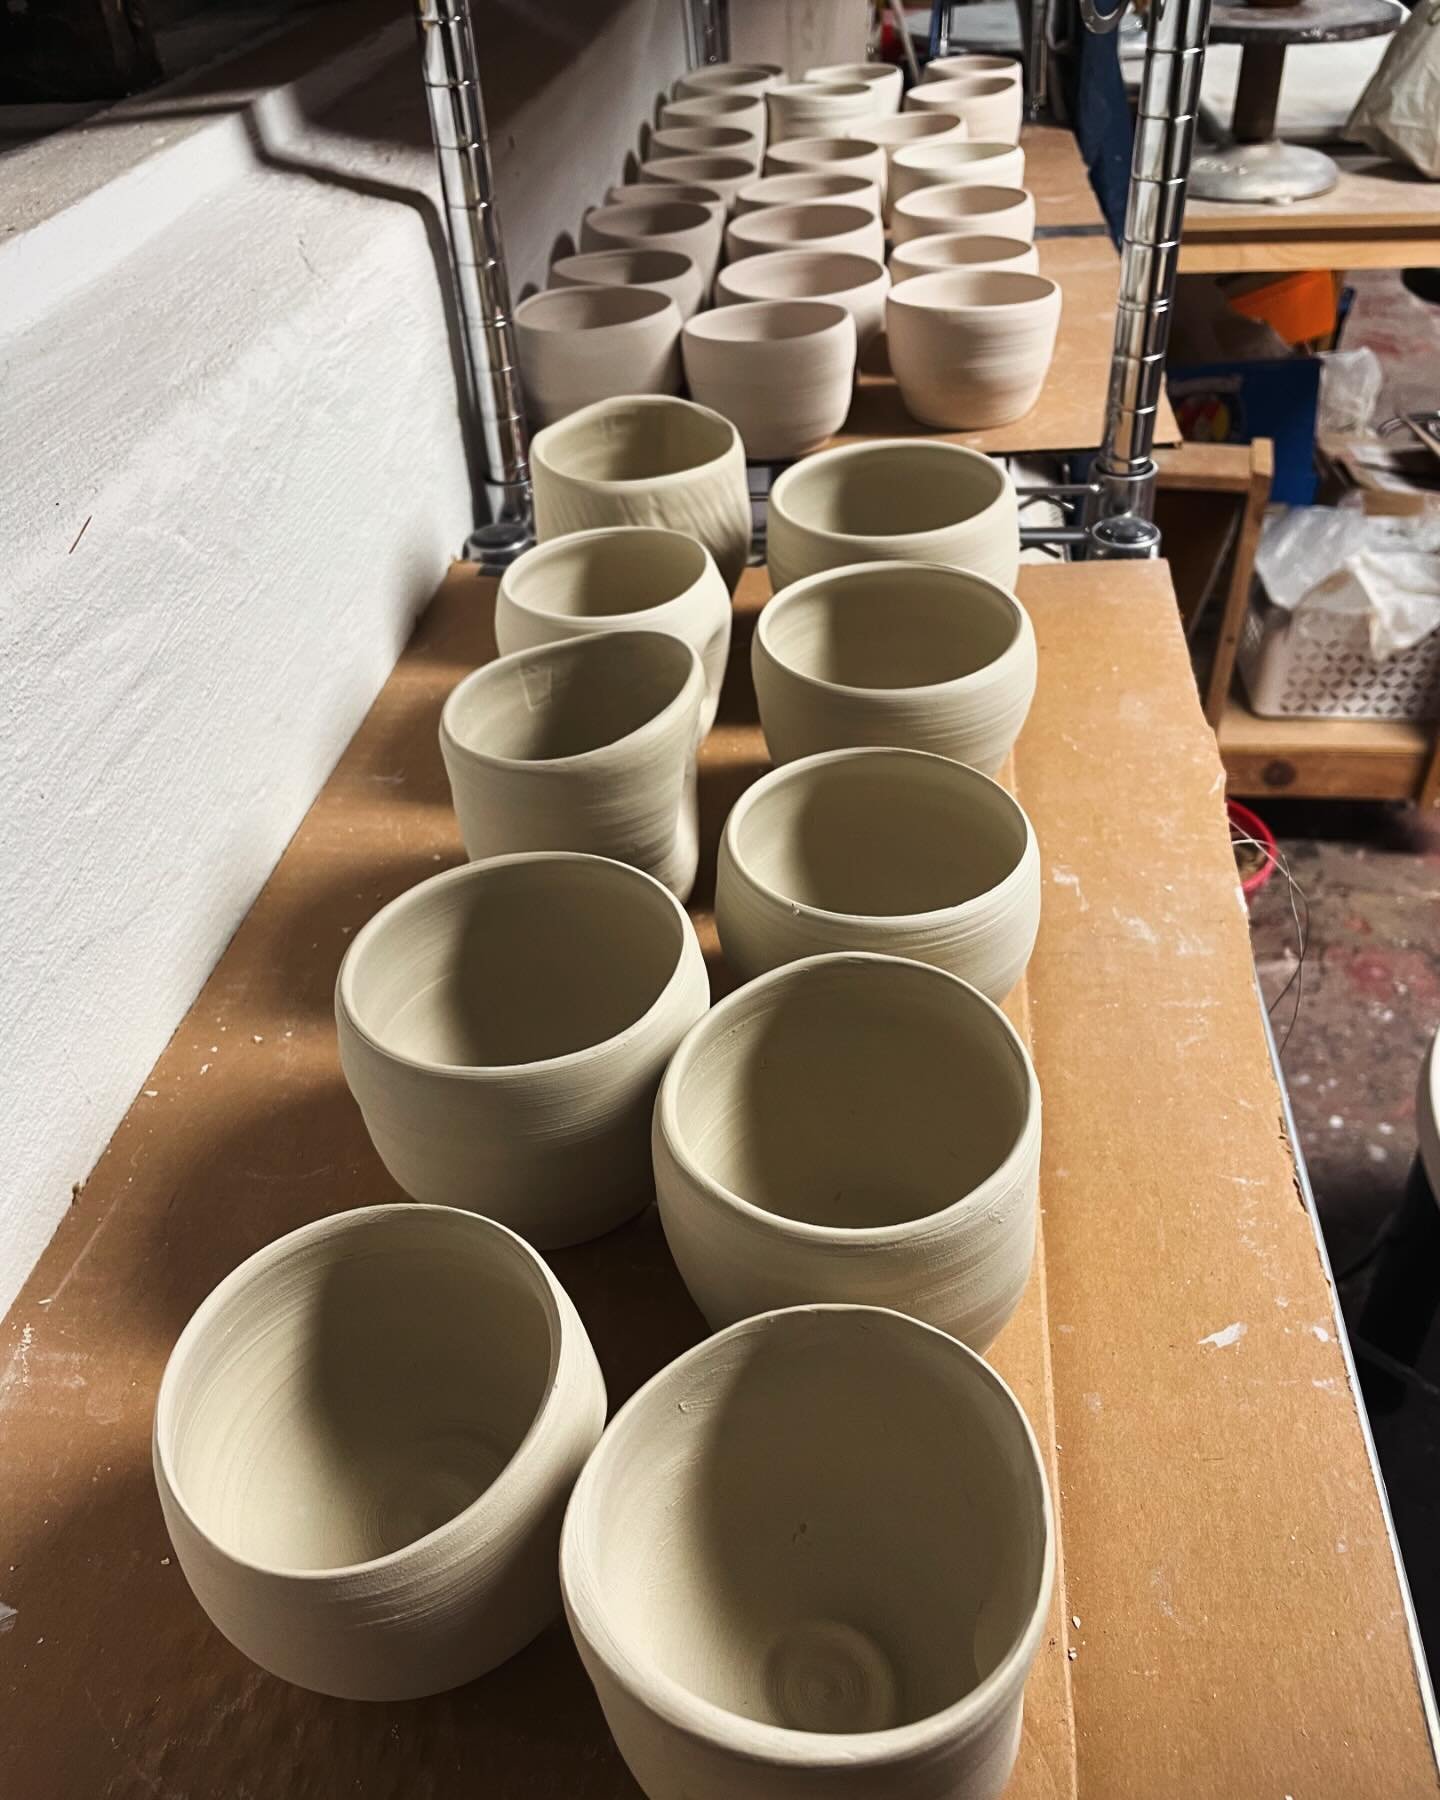 Cups in progress. #homepottery #makingthingsfromclay